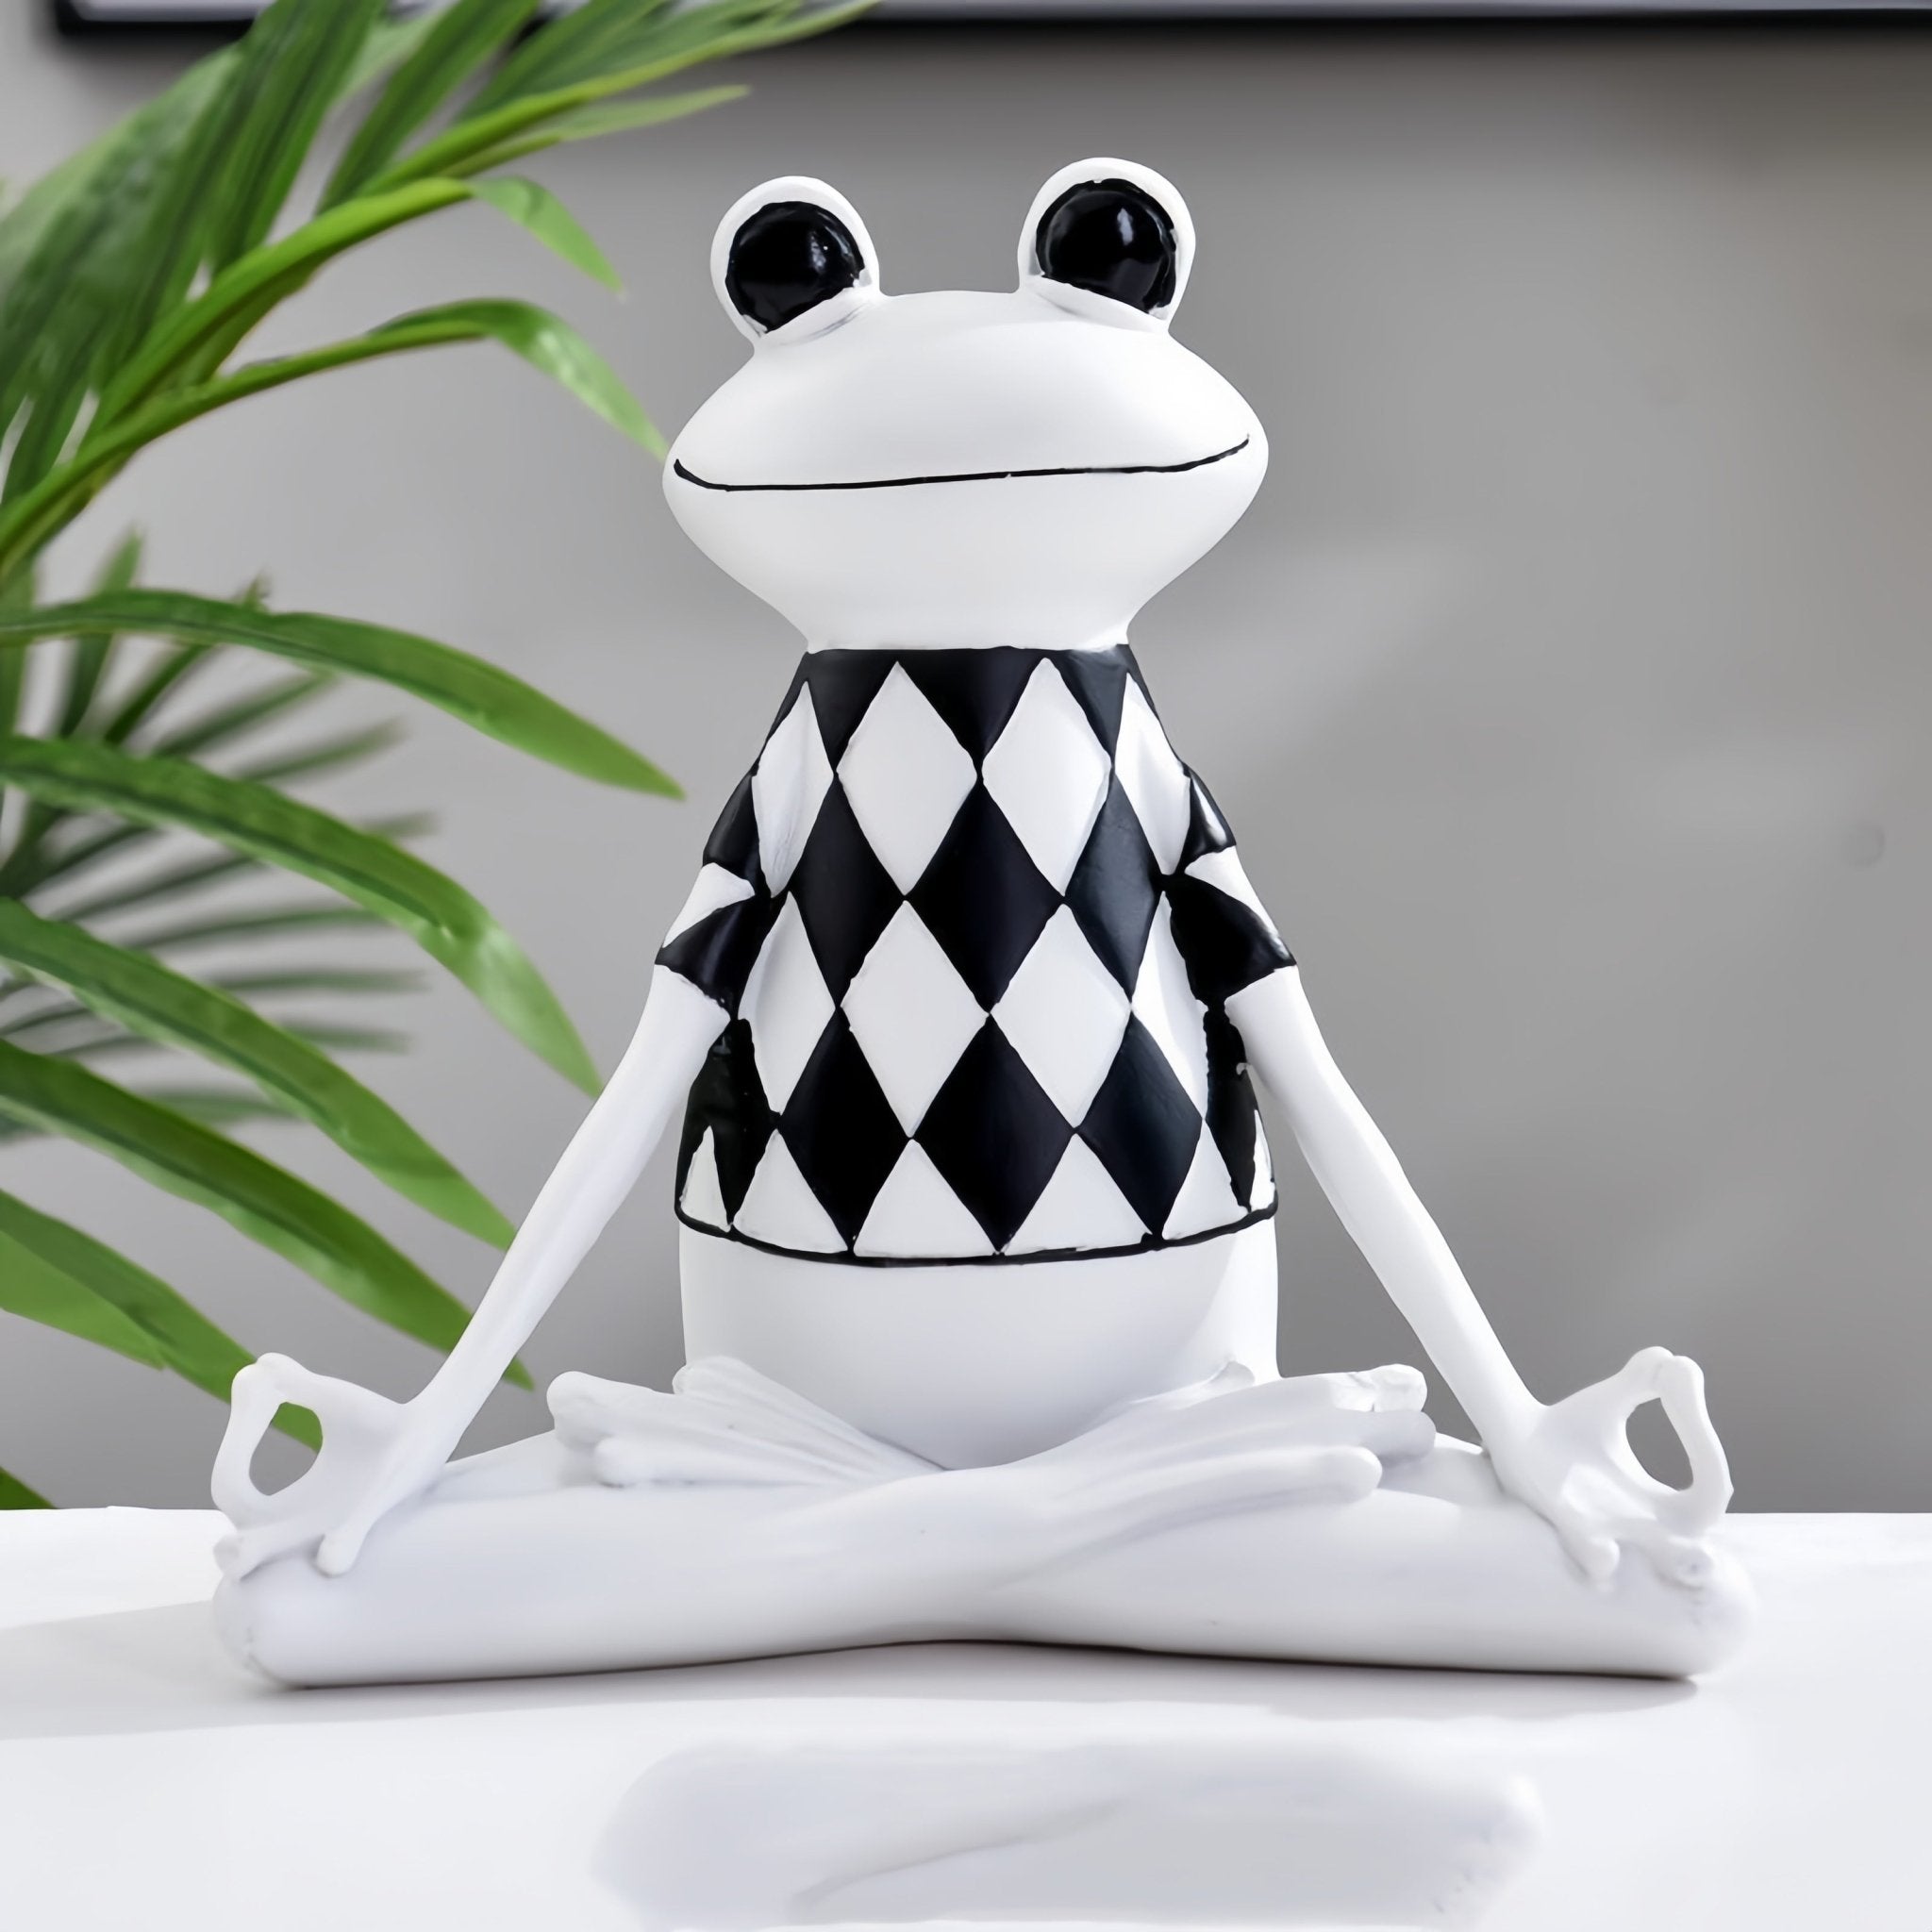 Harmony Zen Frog Statue in a legs-crossed sitting pose against a simple white background.